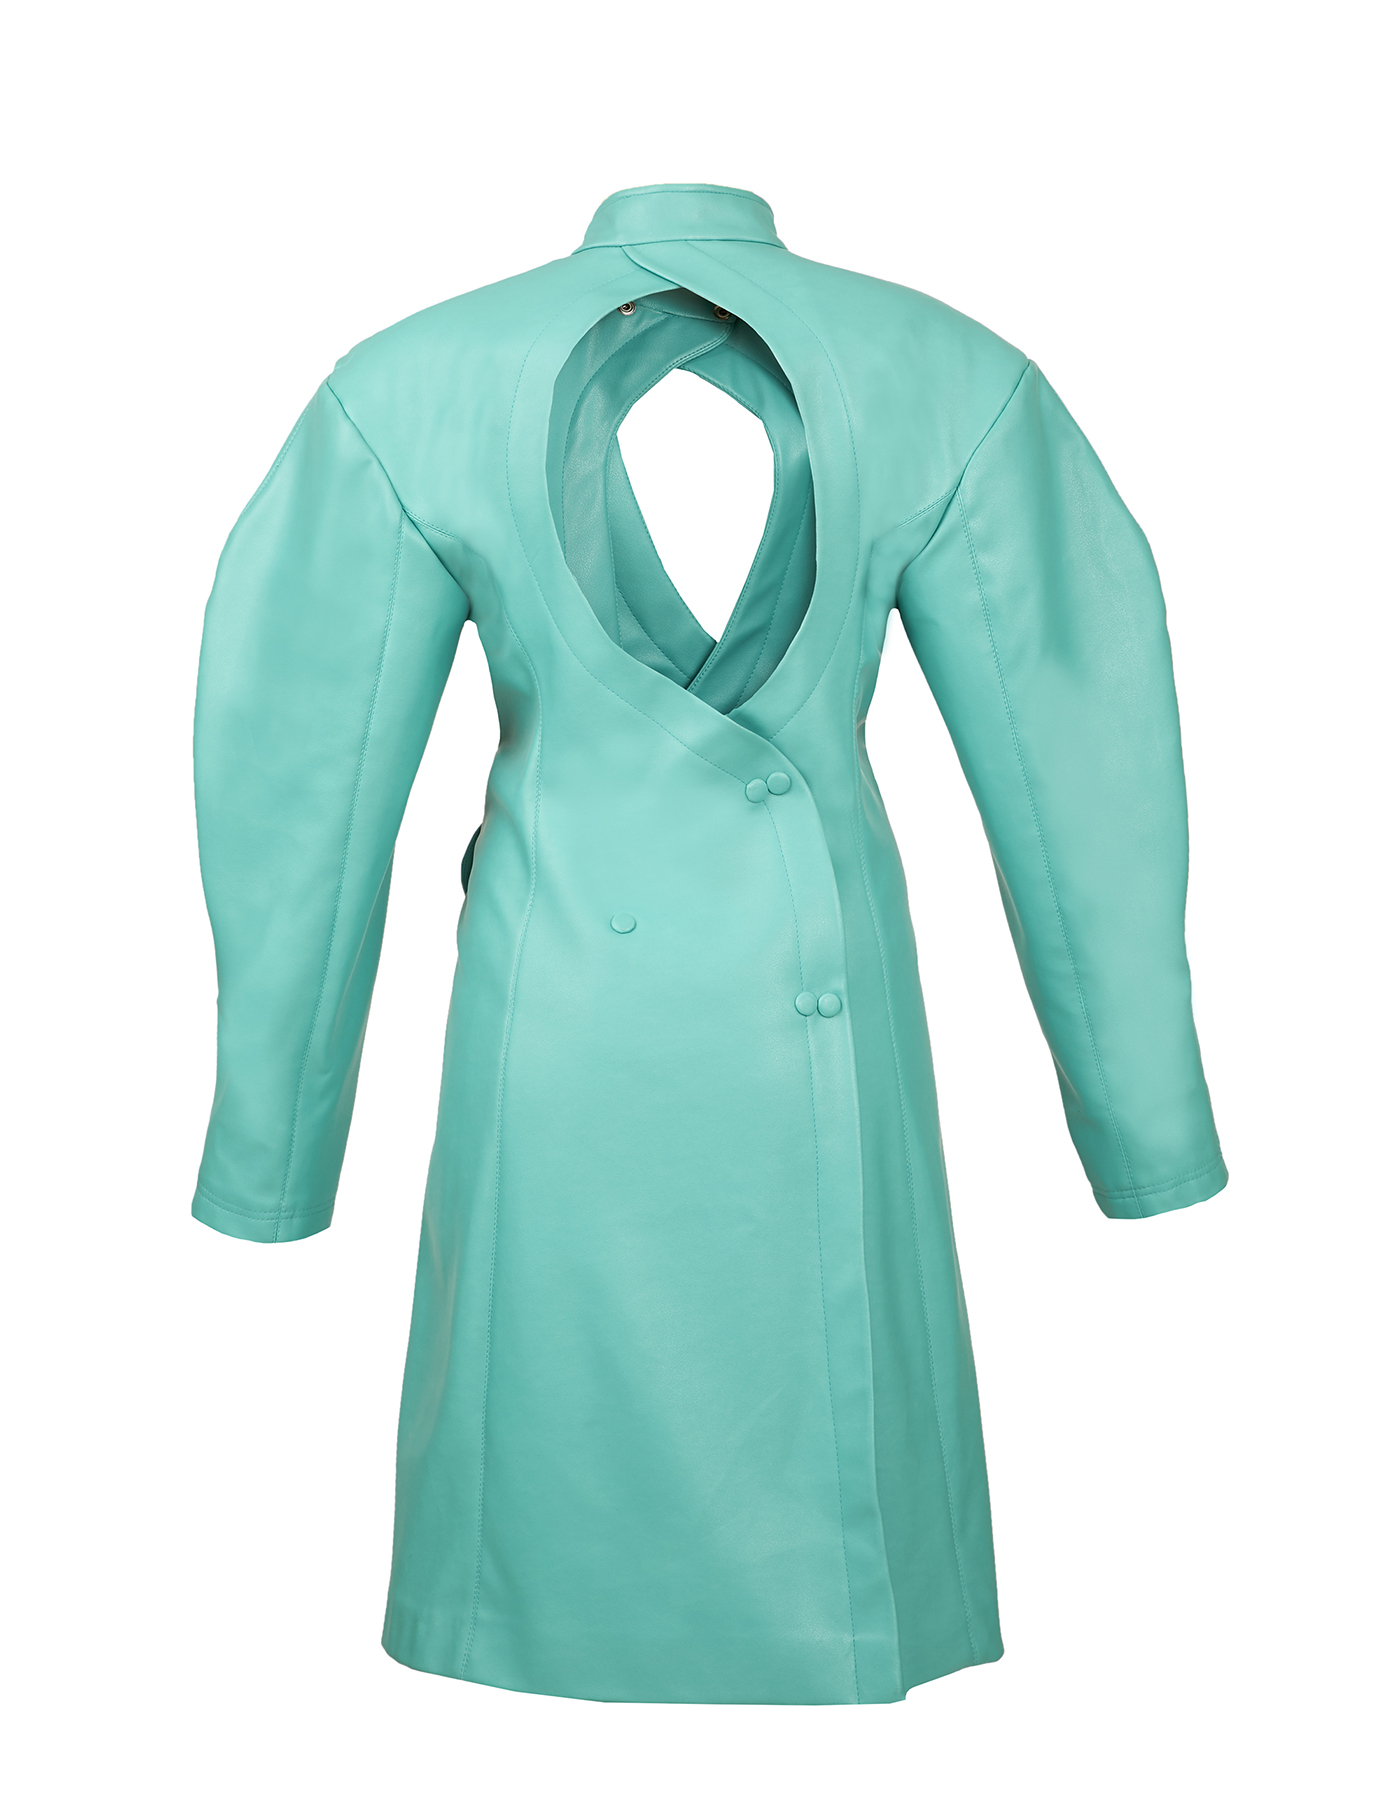 AW21-22. Turquoise puff-sleeve dress (Made to order)